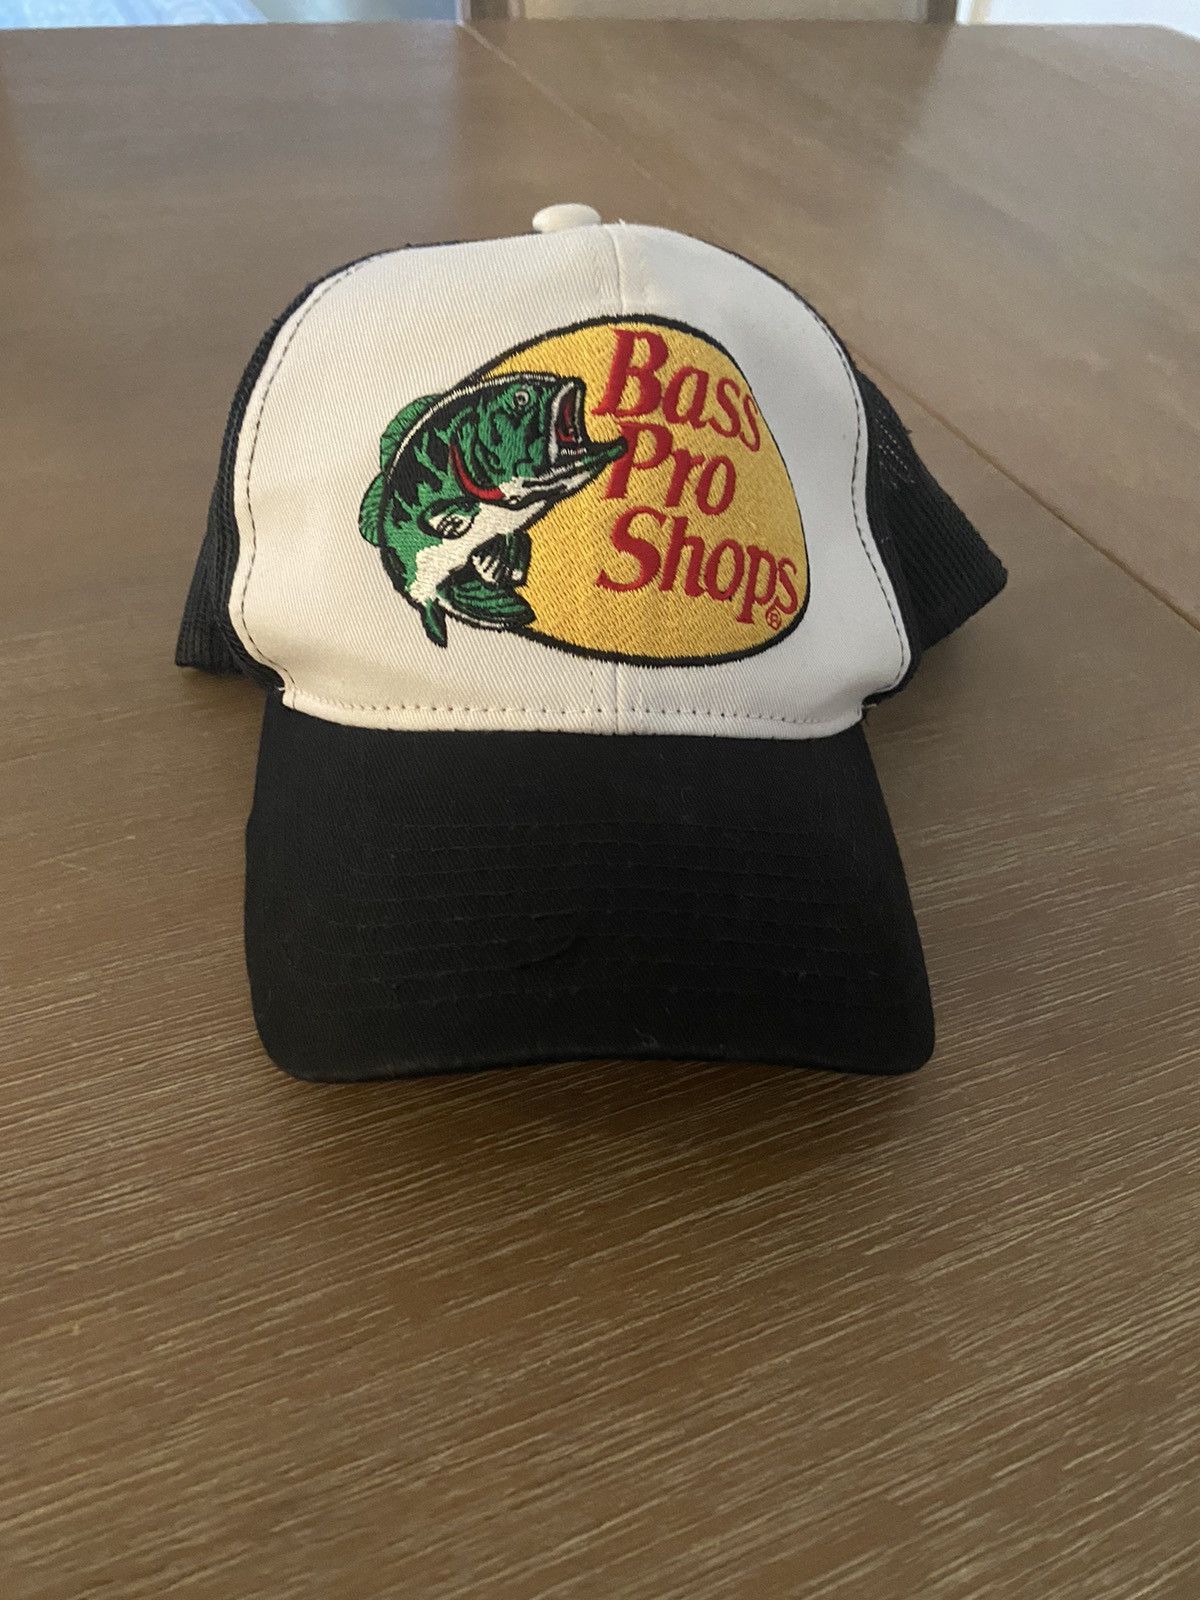 Bass Pro Shops Bass Pro Shops Black and White Trucker Hat | Grailed